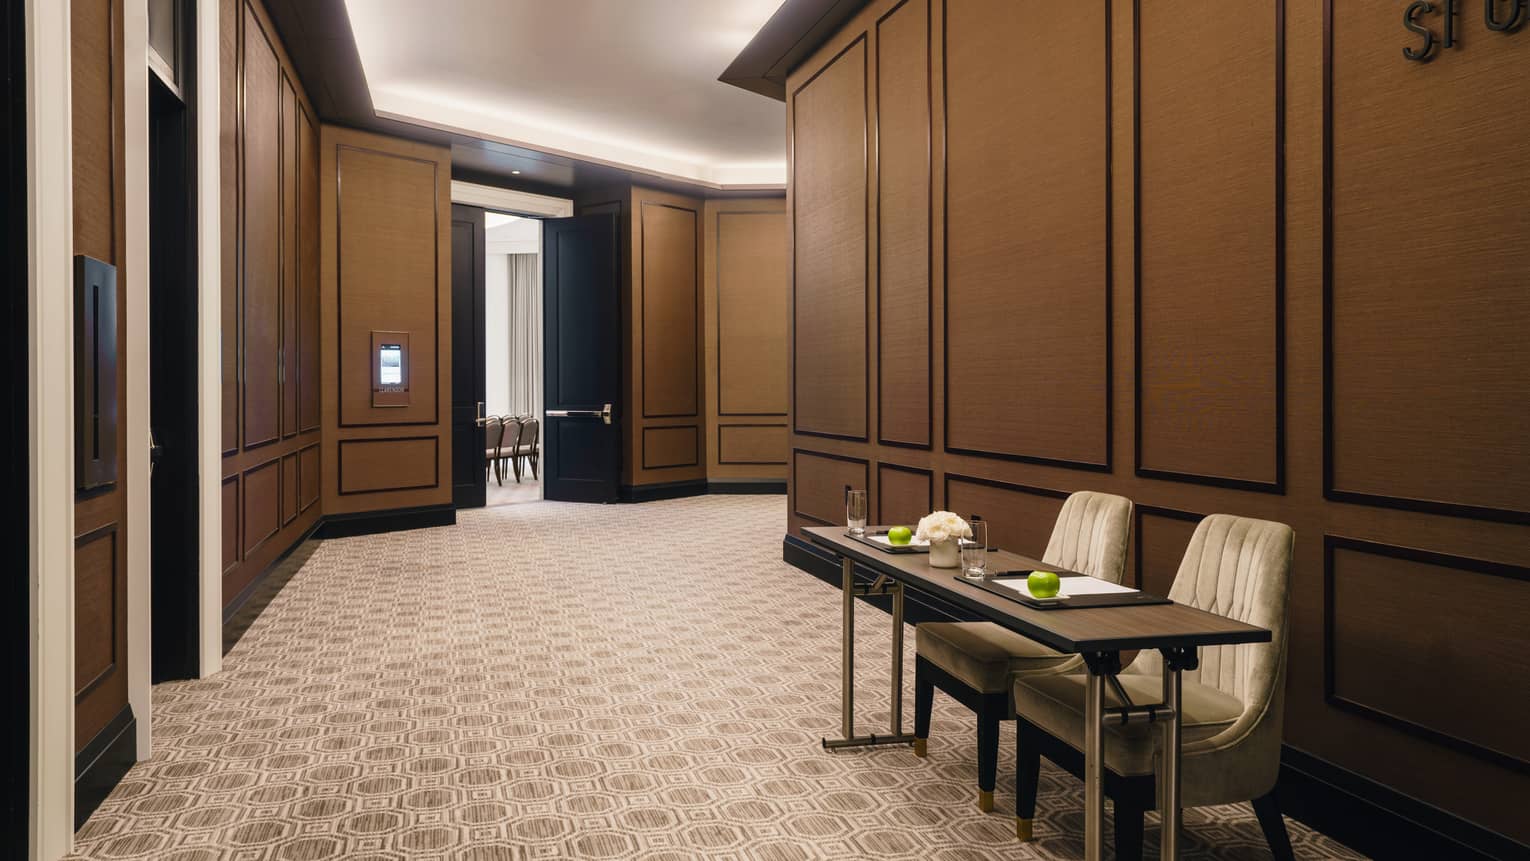 St. Germain foyer with two-person table, uplighting, tan carpet, doors leading to meeting rooms 